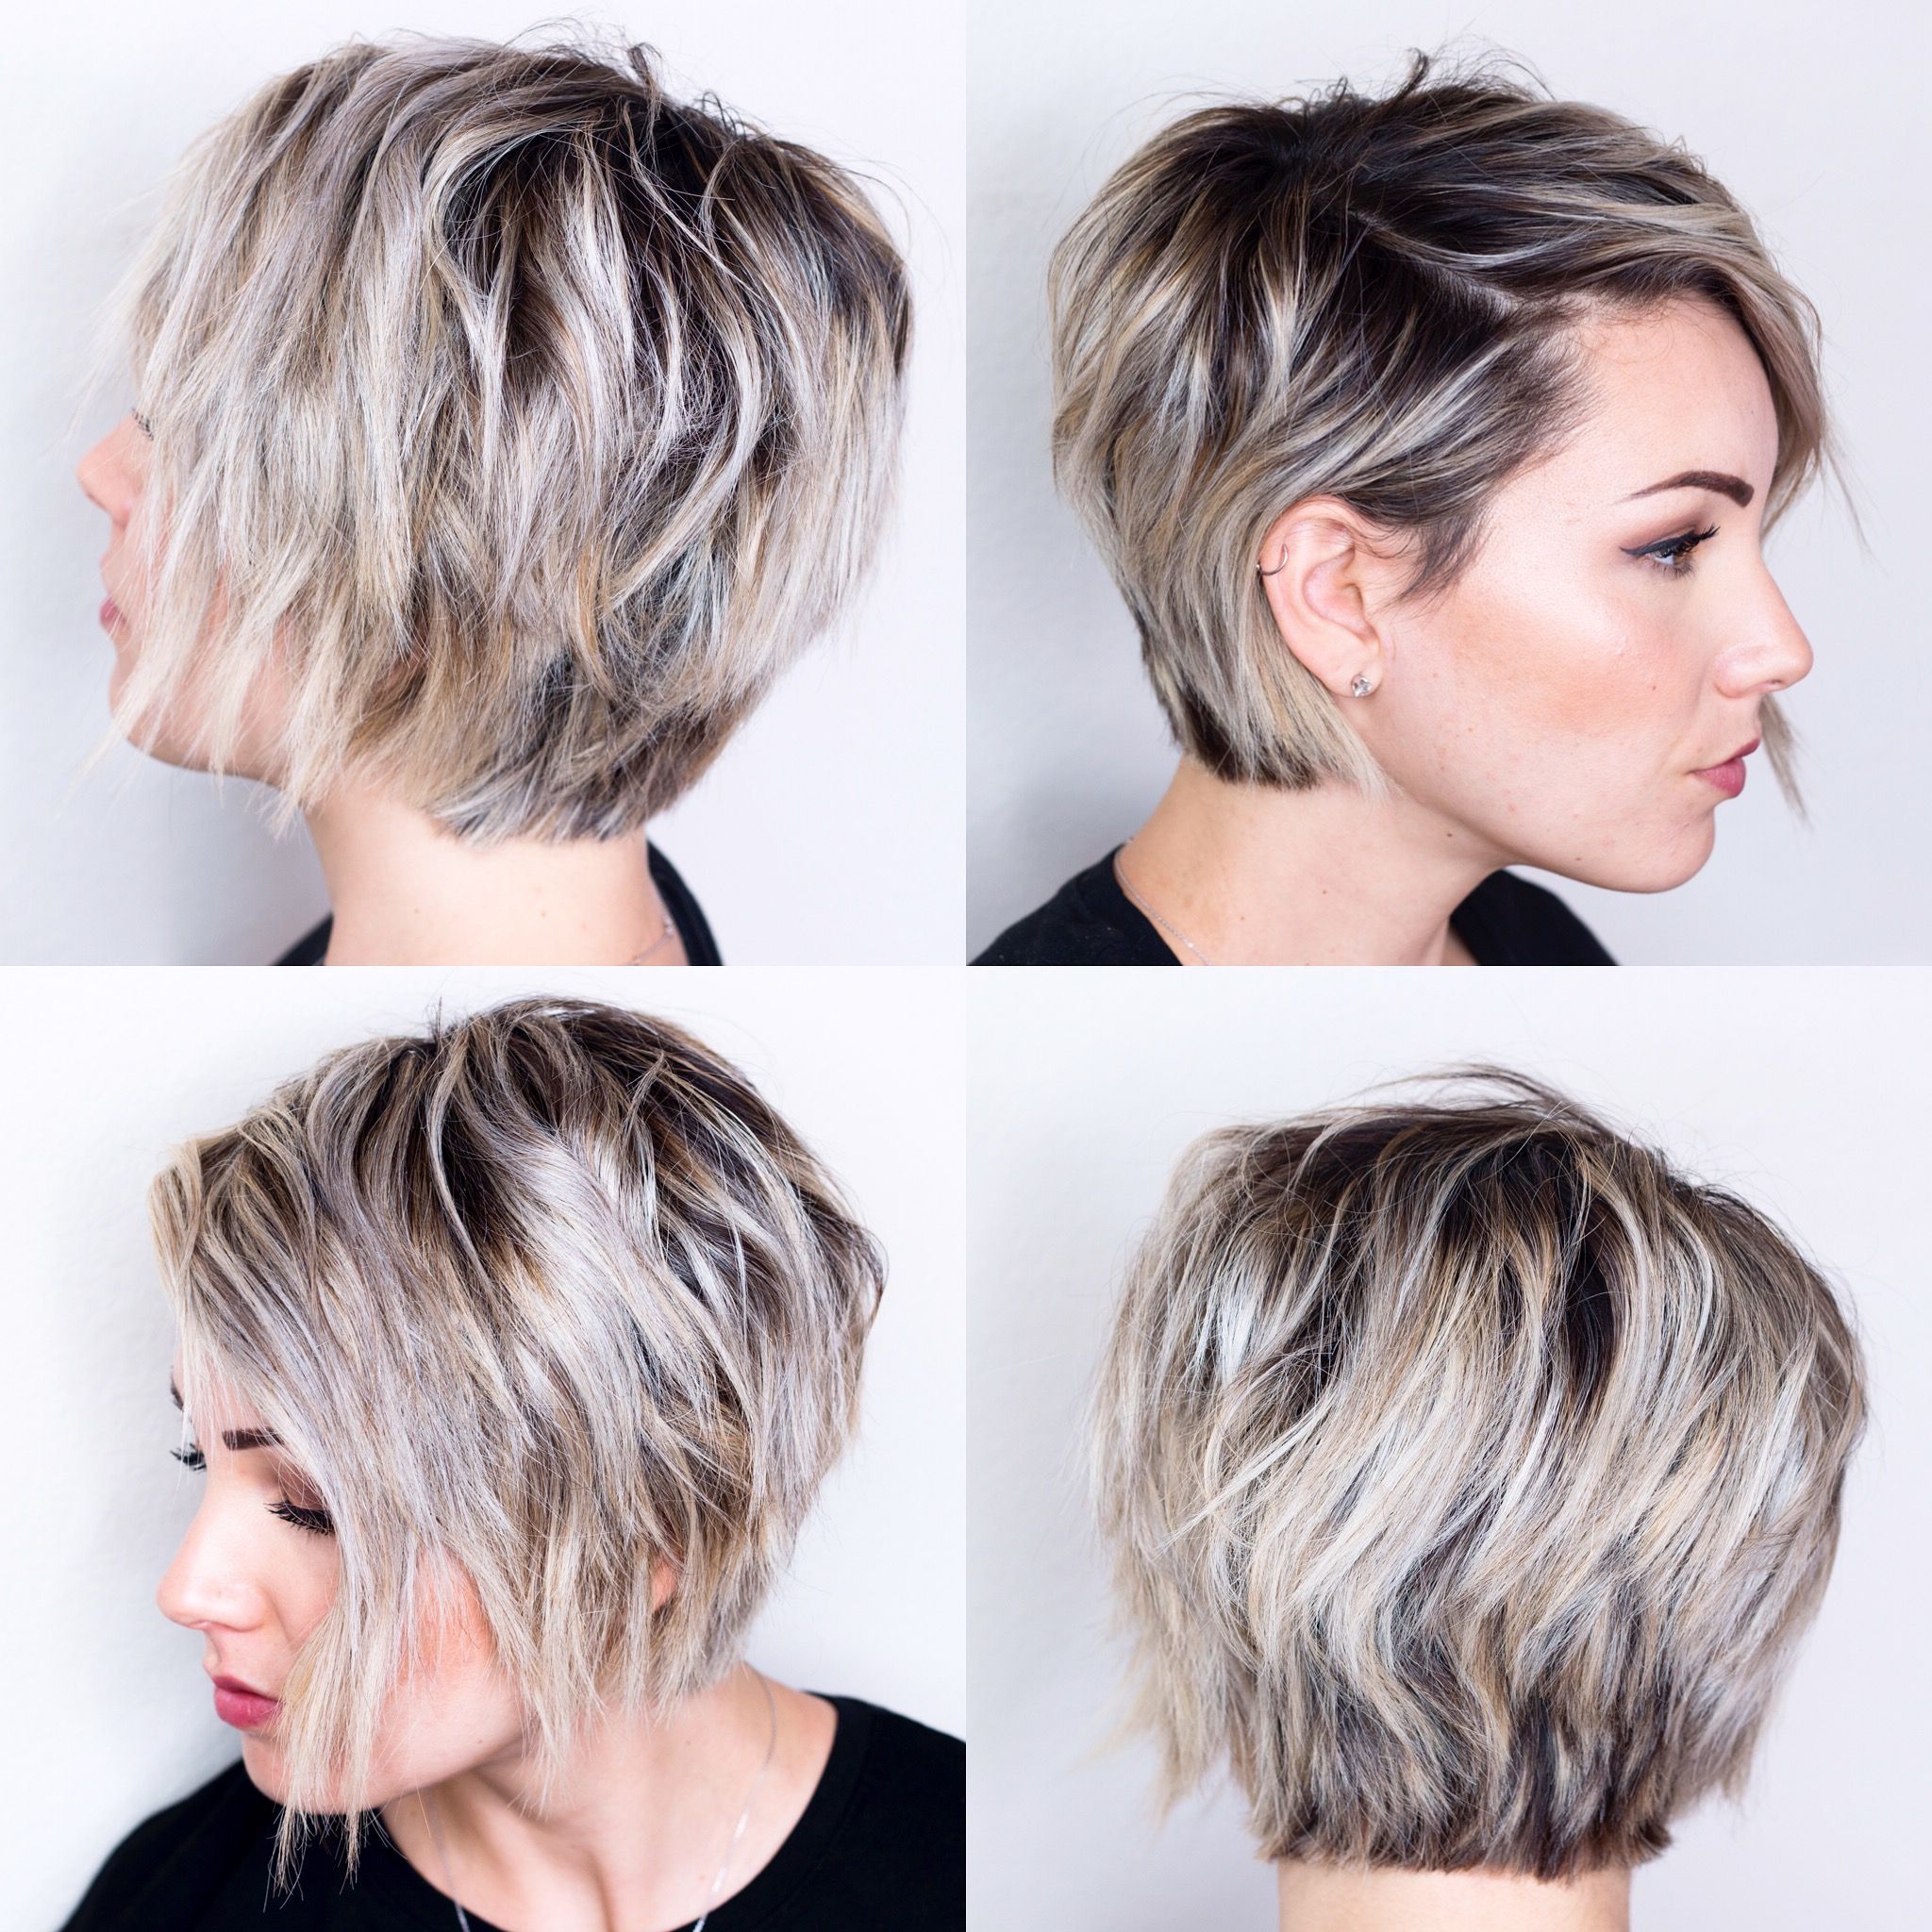 360 View Of Short Hair | H A I R In 2018 | Pinterest | Short Hair With Regard To Short Haircuts For Oval Faces (Photo 1 of 25)